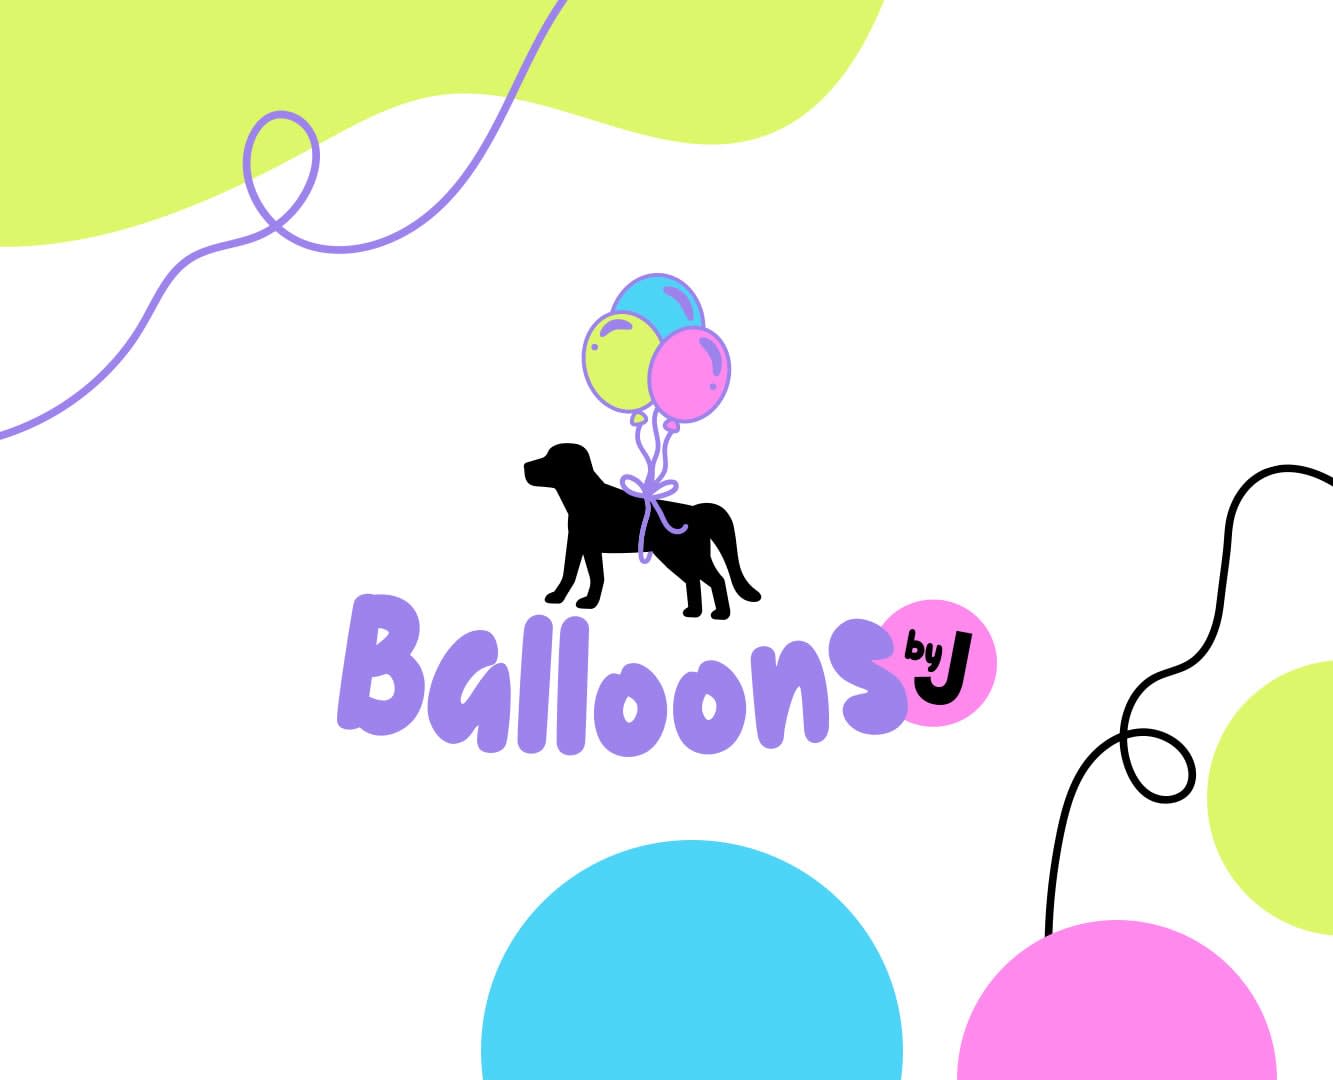 Balloons by J